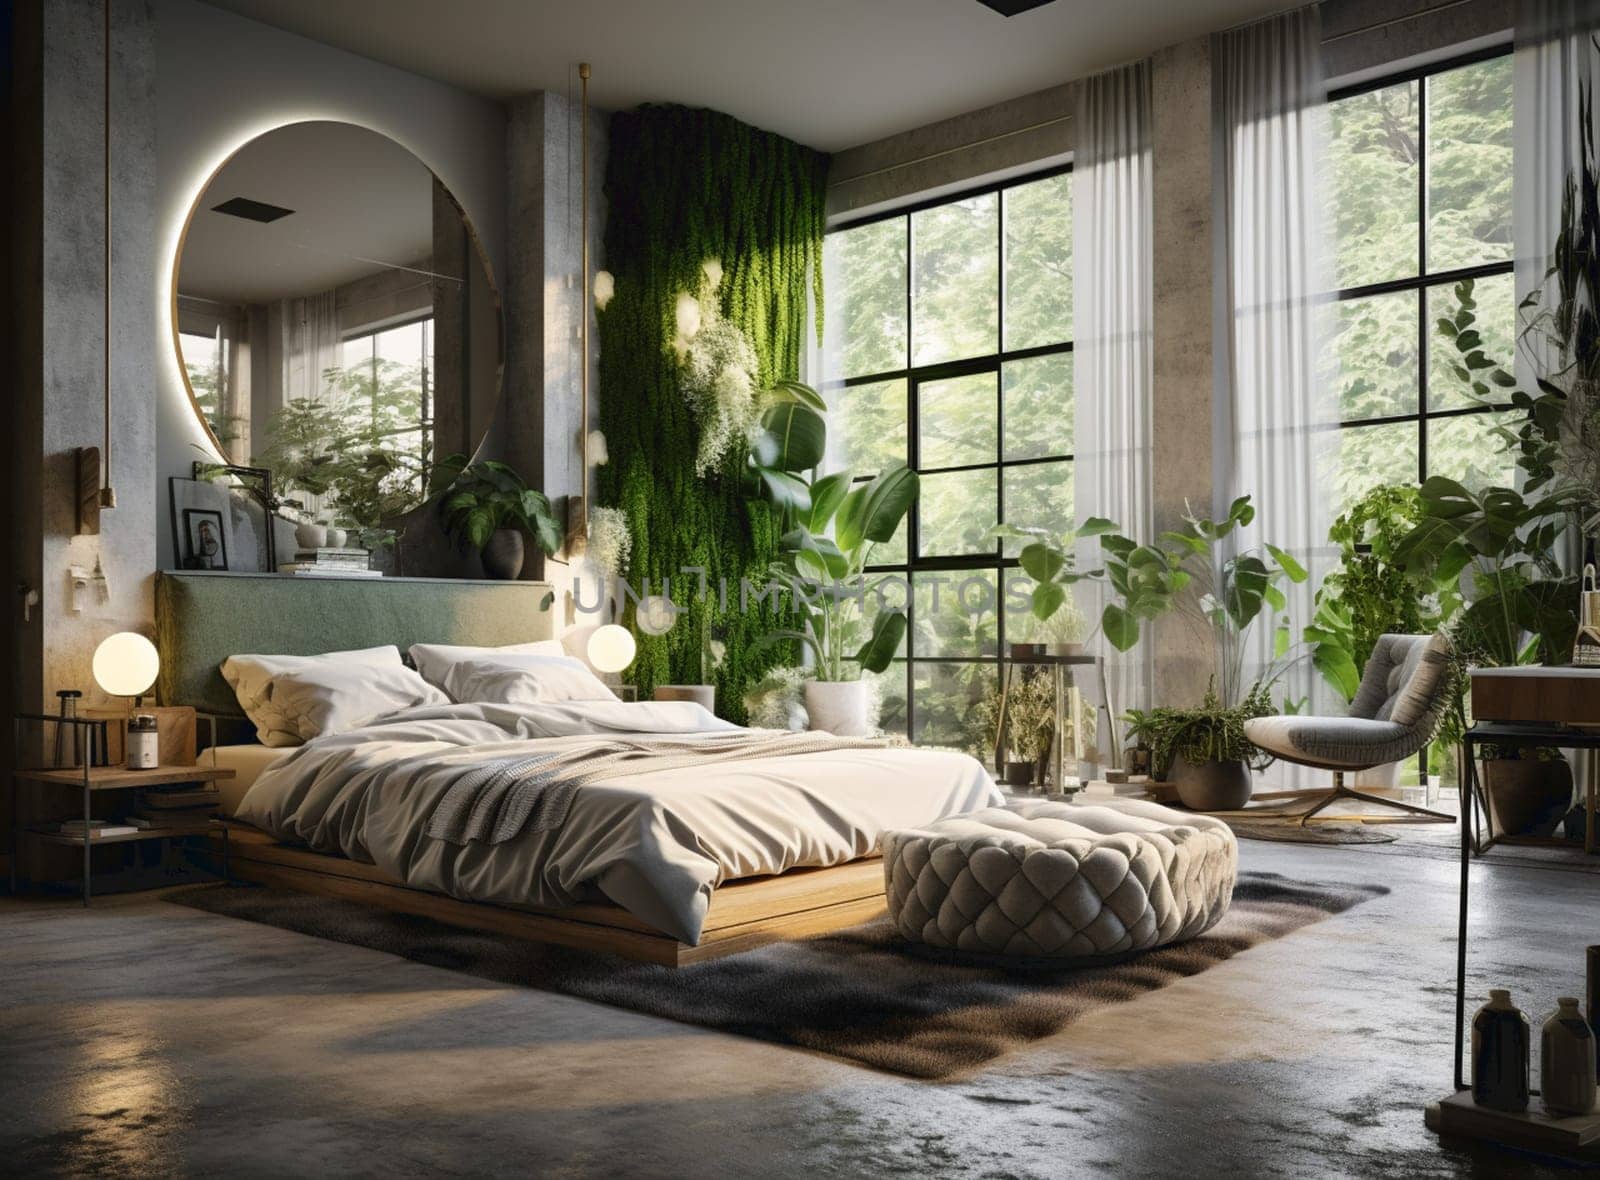 Home garden, minimal bedroom in yellow and wooden tones. Master bed, parquet floor and many houseplants. Urban jungle interior design. Biophilia concept, 3d illustration by Andelov13